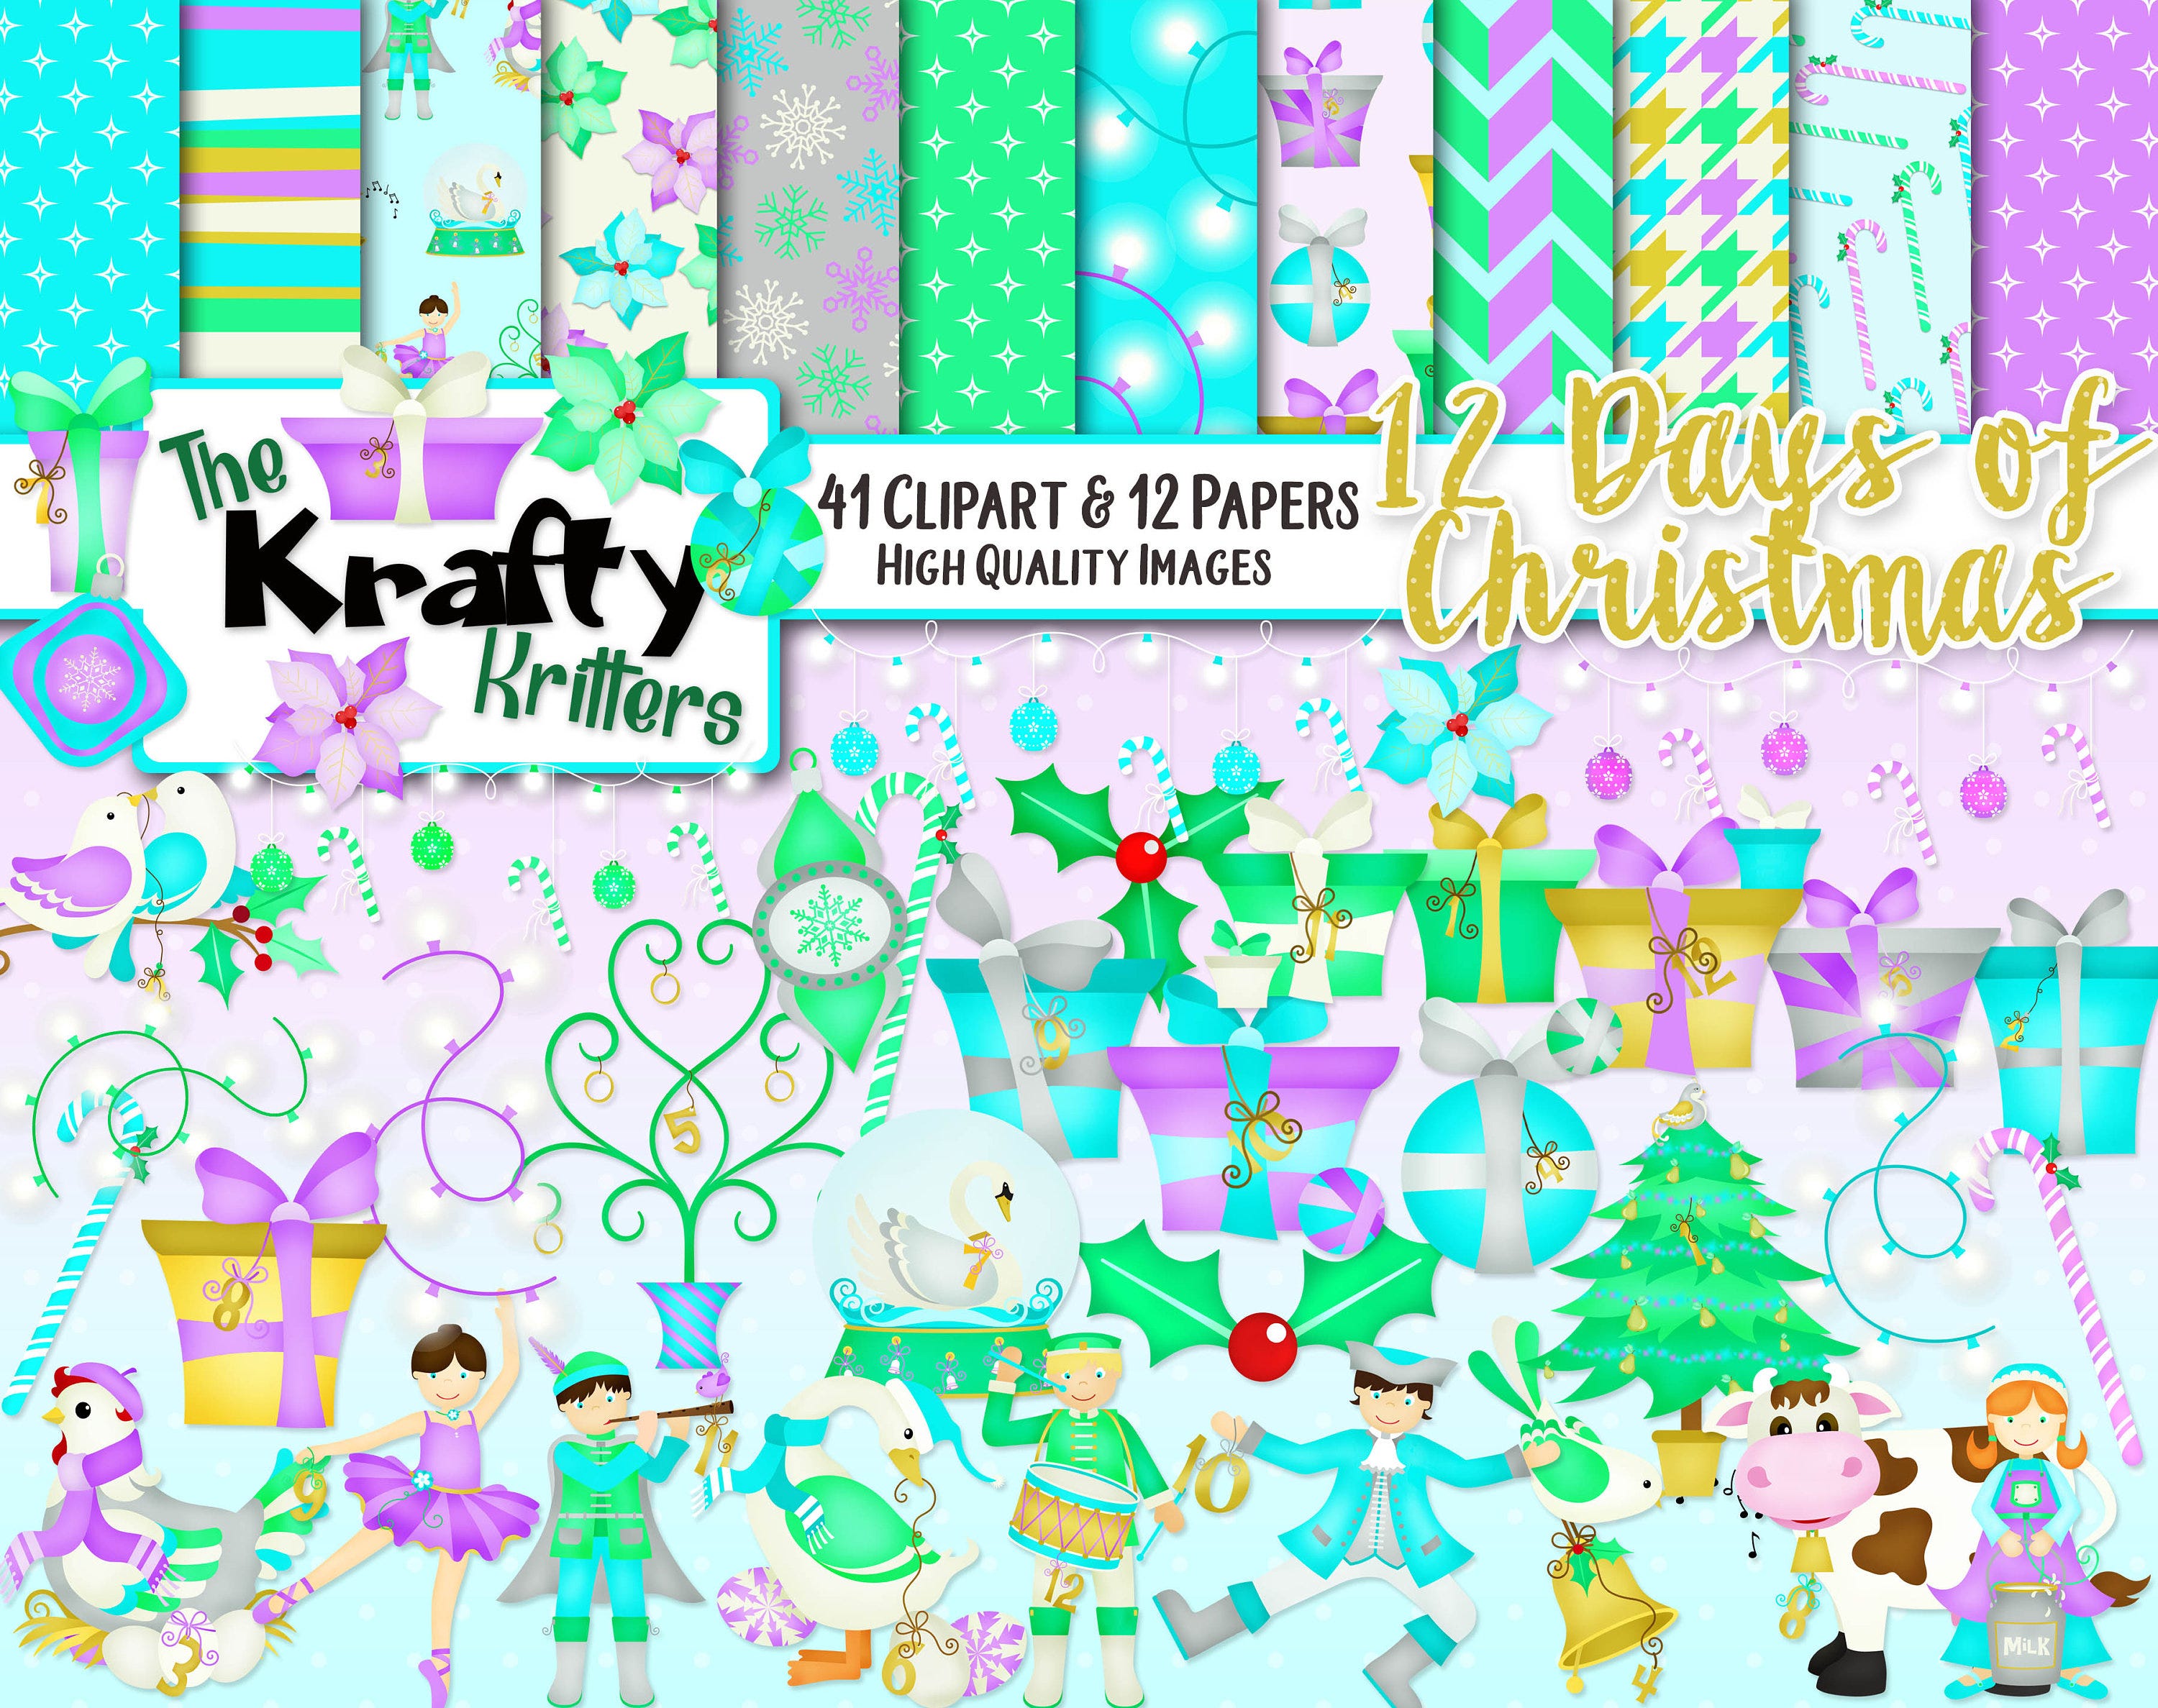 12 DAYS OF CHRISTMAS Clipart & Papers Kit, 41 png Cliparts, 12 jpeg Papers Instant Download presents mistletoe lights turtledoves xmas gifts